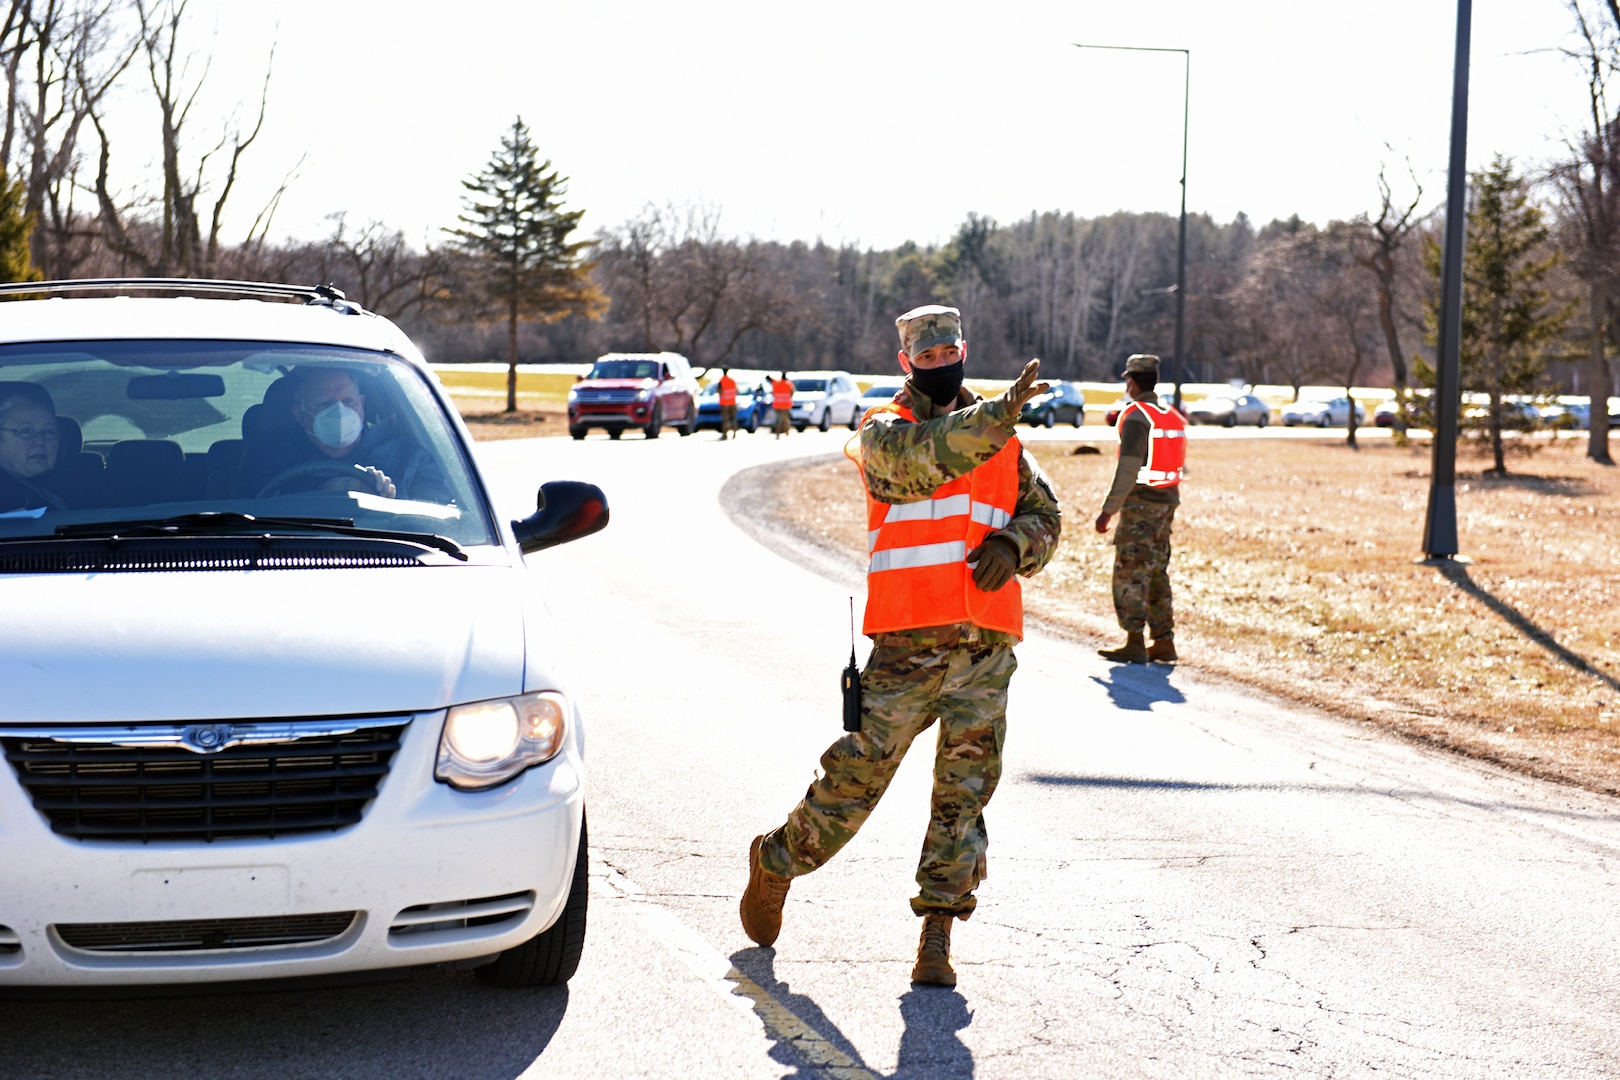 A Michigan Army National Guard Soldier directs traffic at a vaccination clinic at Delta College, University City, Michigan, March 6, 2021. The Guard helped vaccinate 2,600 residents during the two-day indoor/outdoor event.